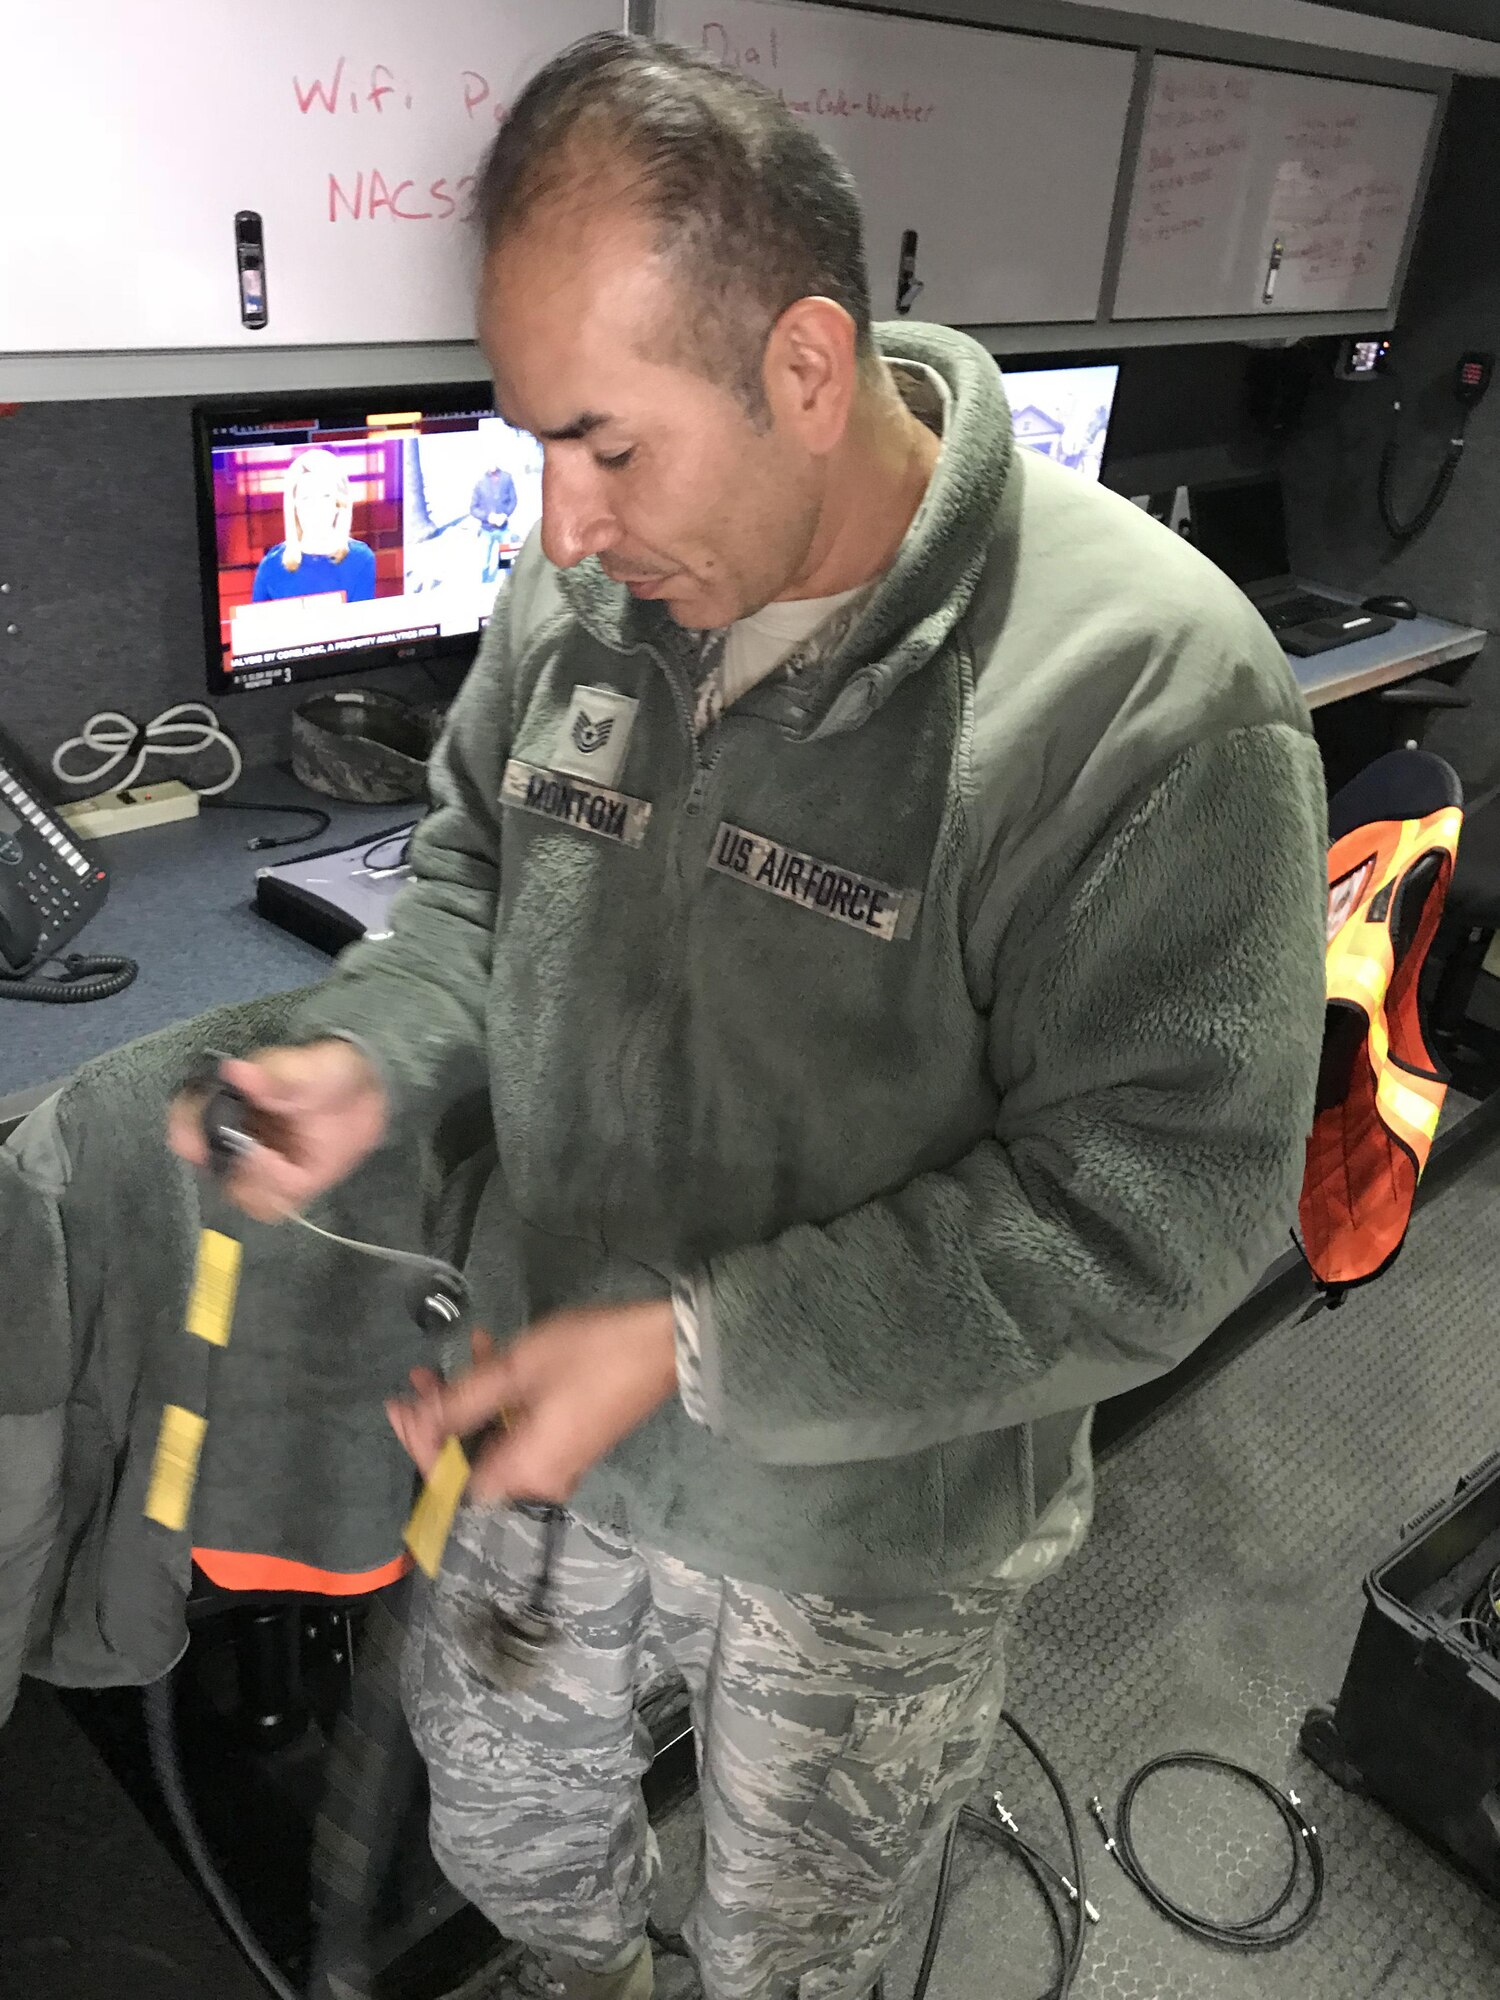 California Air National Guard Tech. Sgt. Javier Montoya sets up a flyaway kit Oct. 11, 2017, to provide satellite internet service inside a Mobile Emergency Operations Center (MEOC) from the 163d Attack Wing at March Air Reserve Base, to evacuees at Napa Valley College in Napa, California. The MEOC provided wireless internet access and a cell phone network for victims of the Northern California fires who took up shelter in the college gymnasium. (U.S. Air National Guard photo by Staff Sgt. Tyler Crumpton)